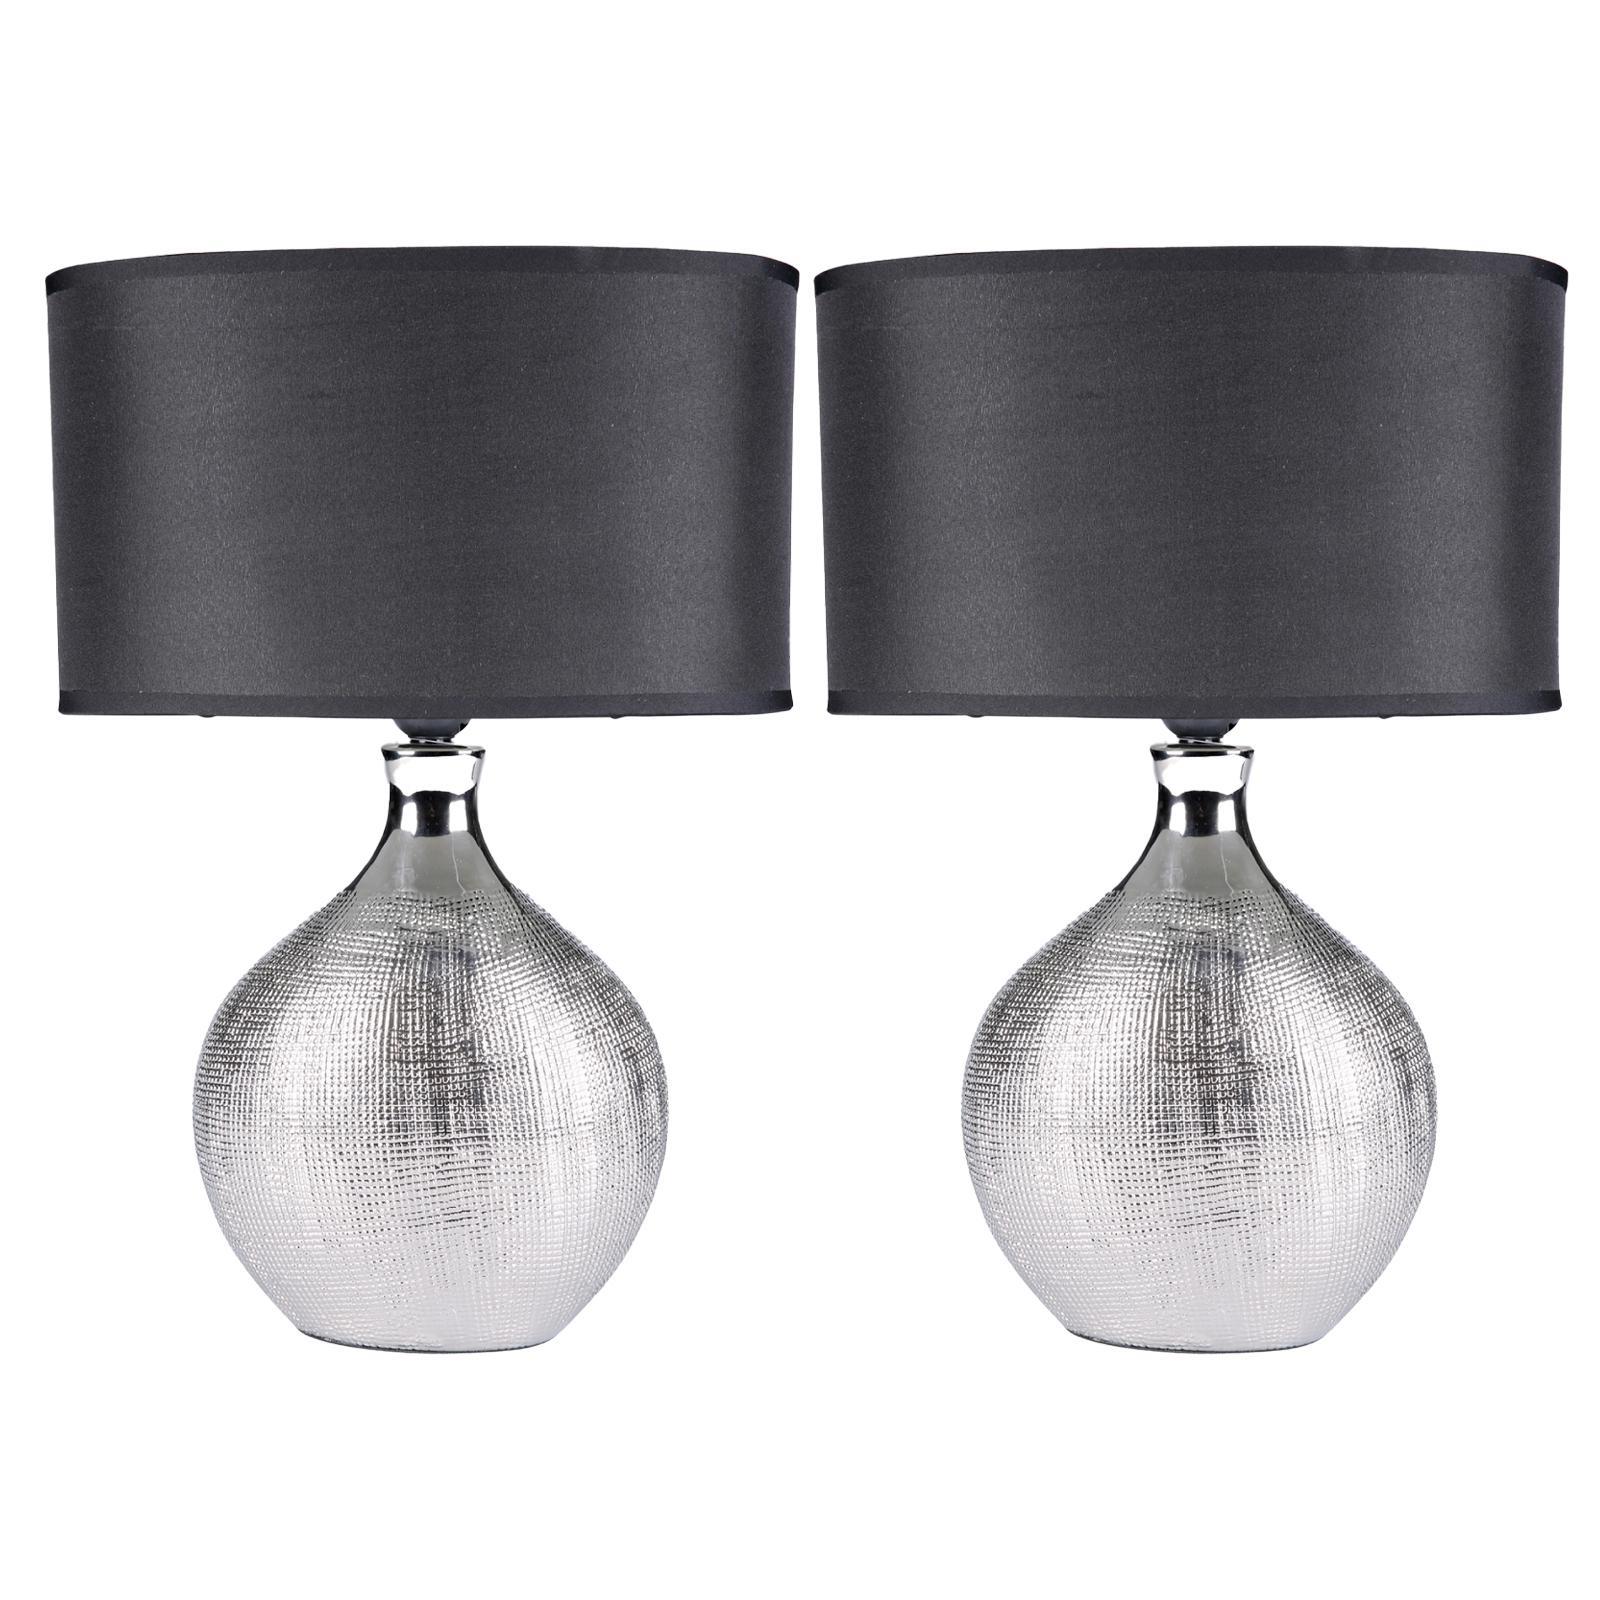 Sherwood Lighting Set of 2 Cosmo Contemporary Bedside Table Lamp Art Deco Textured Silver